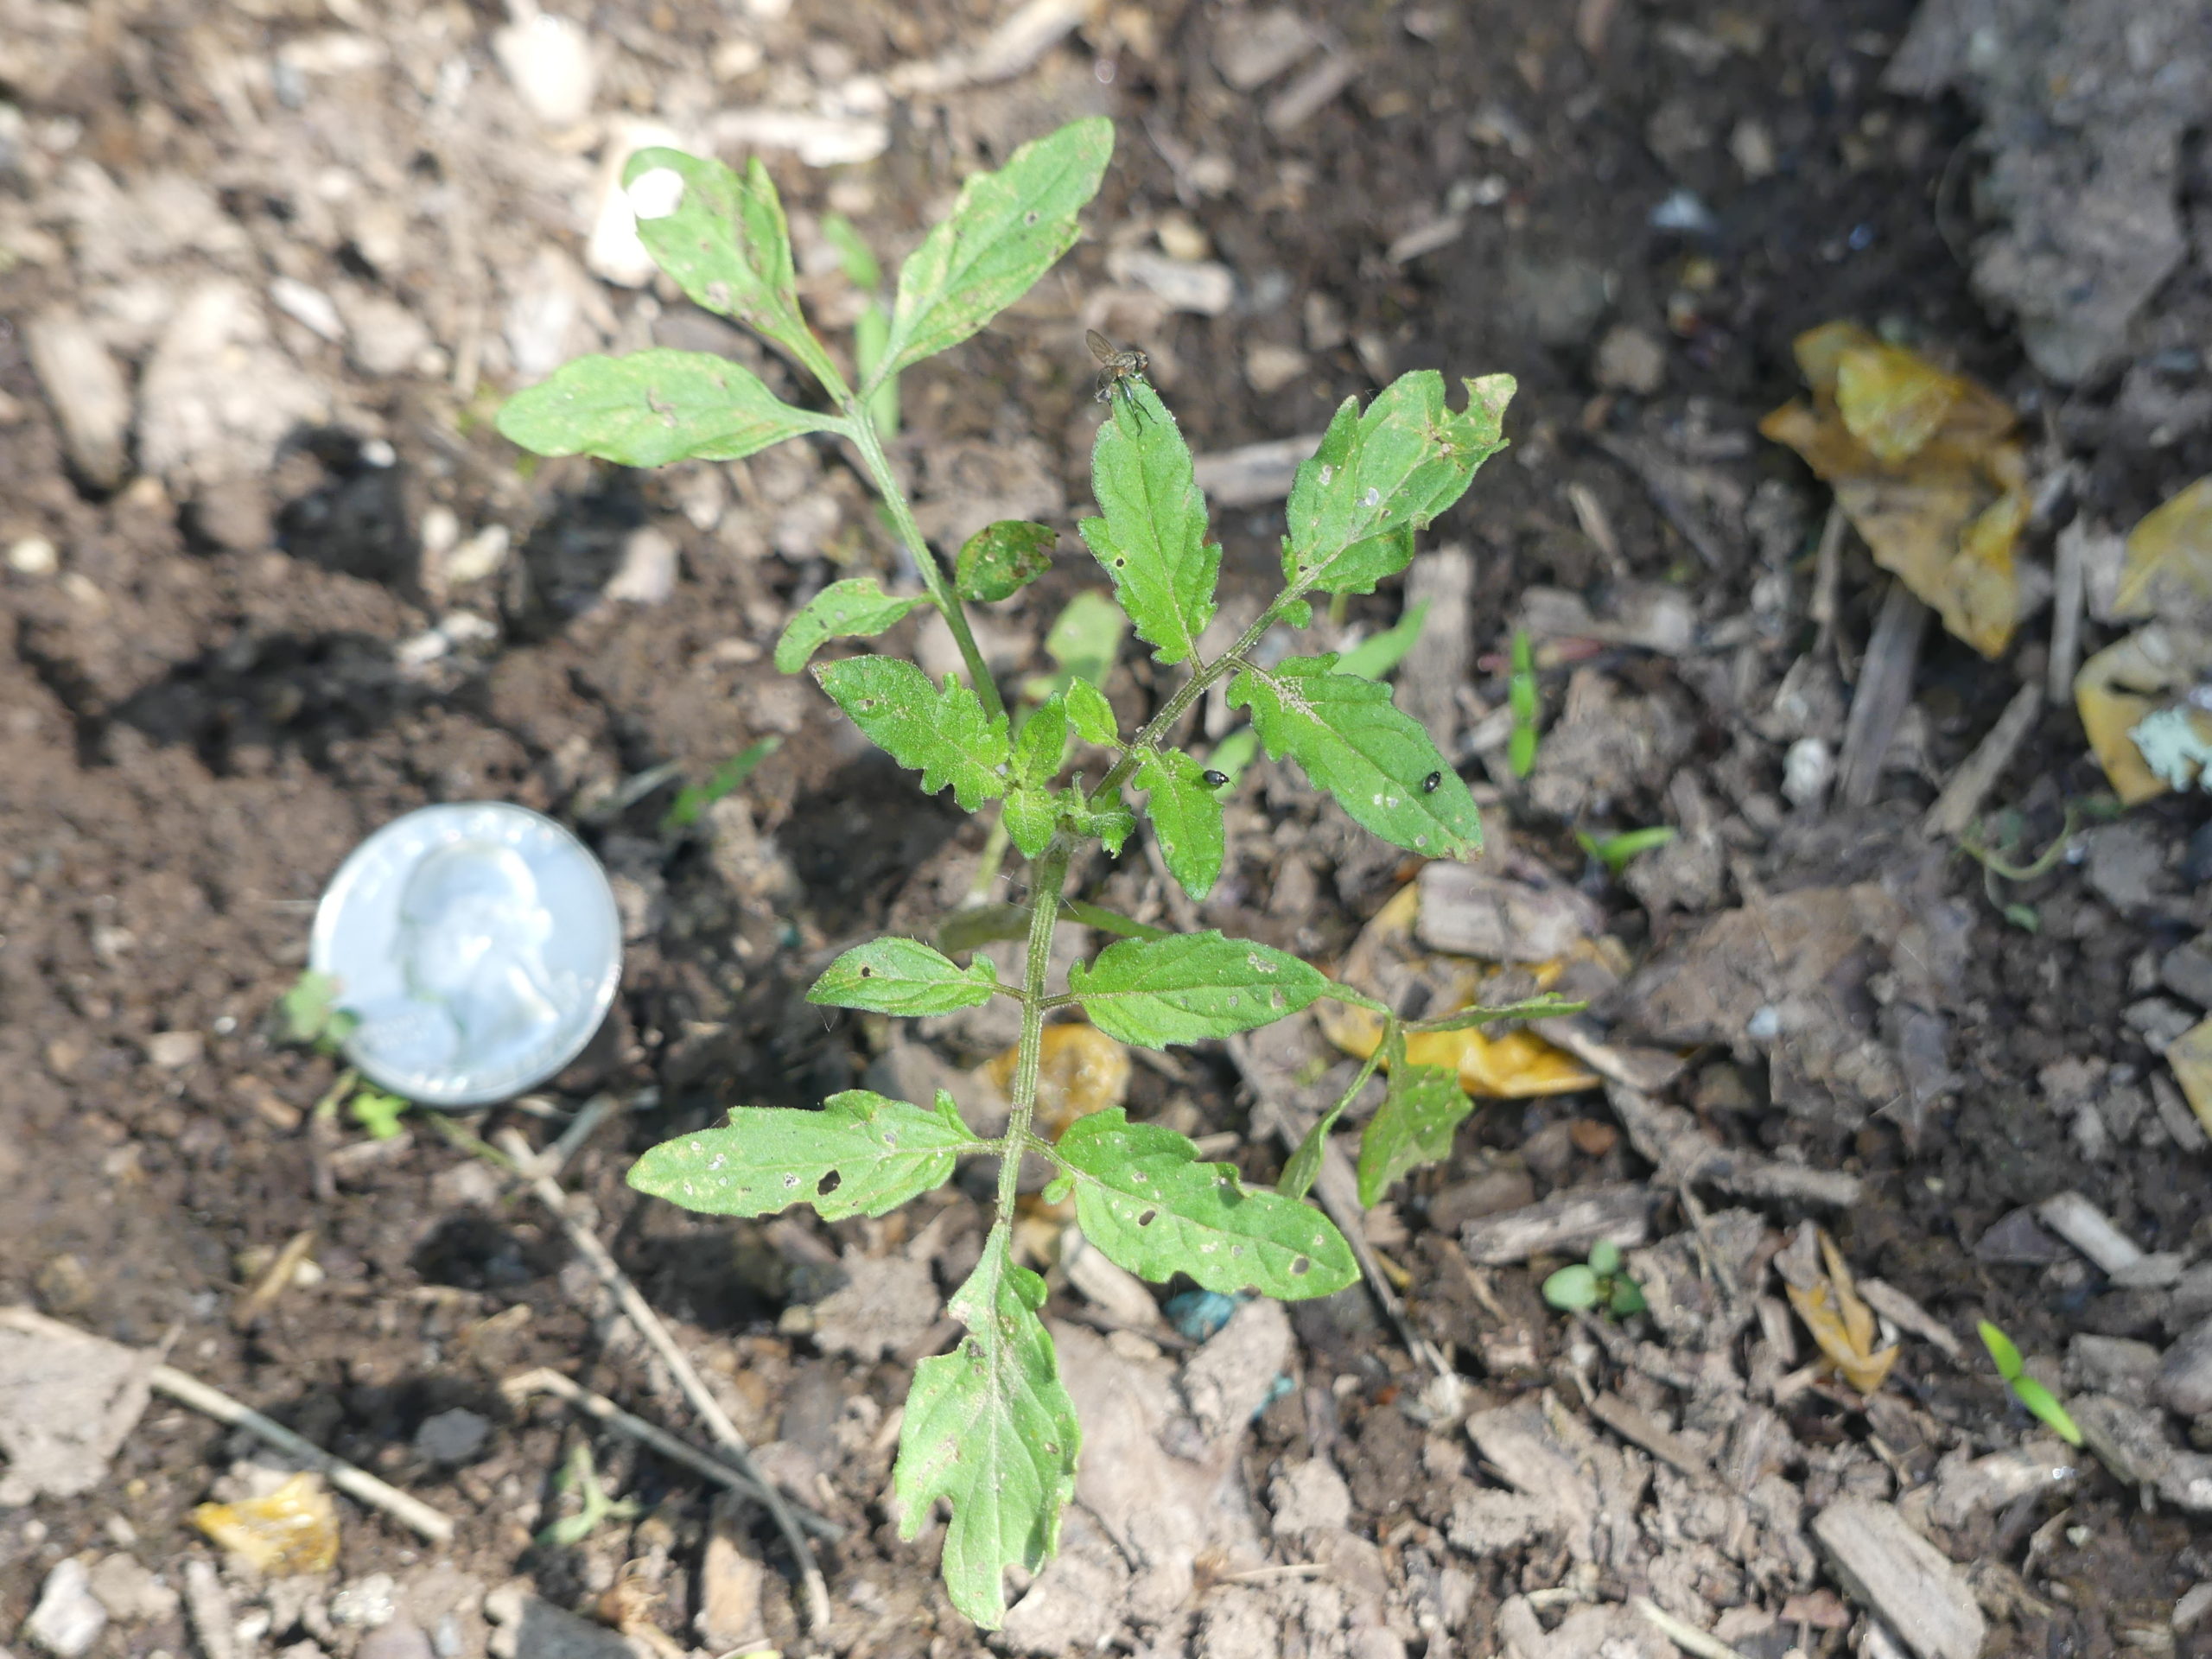 A Sweet 100 seedling that sprouted from a dropped fruit last summer. Will it pick up the soil-borne diseases resulting from poor sanitation practices? Stay tuned. By August, this 6-inch seedling may be 5 feet tall and 15 feet long with a root system covering 35 square feet. ANDREW MESSINGER